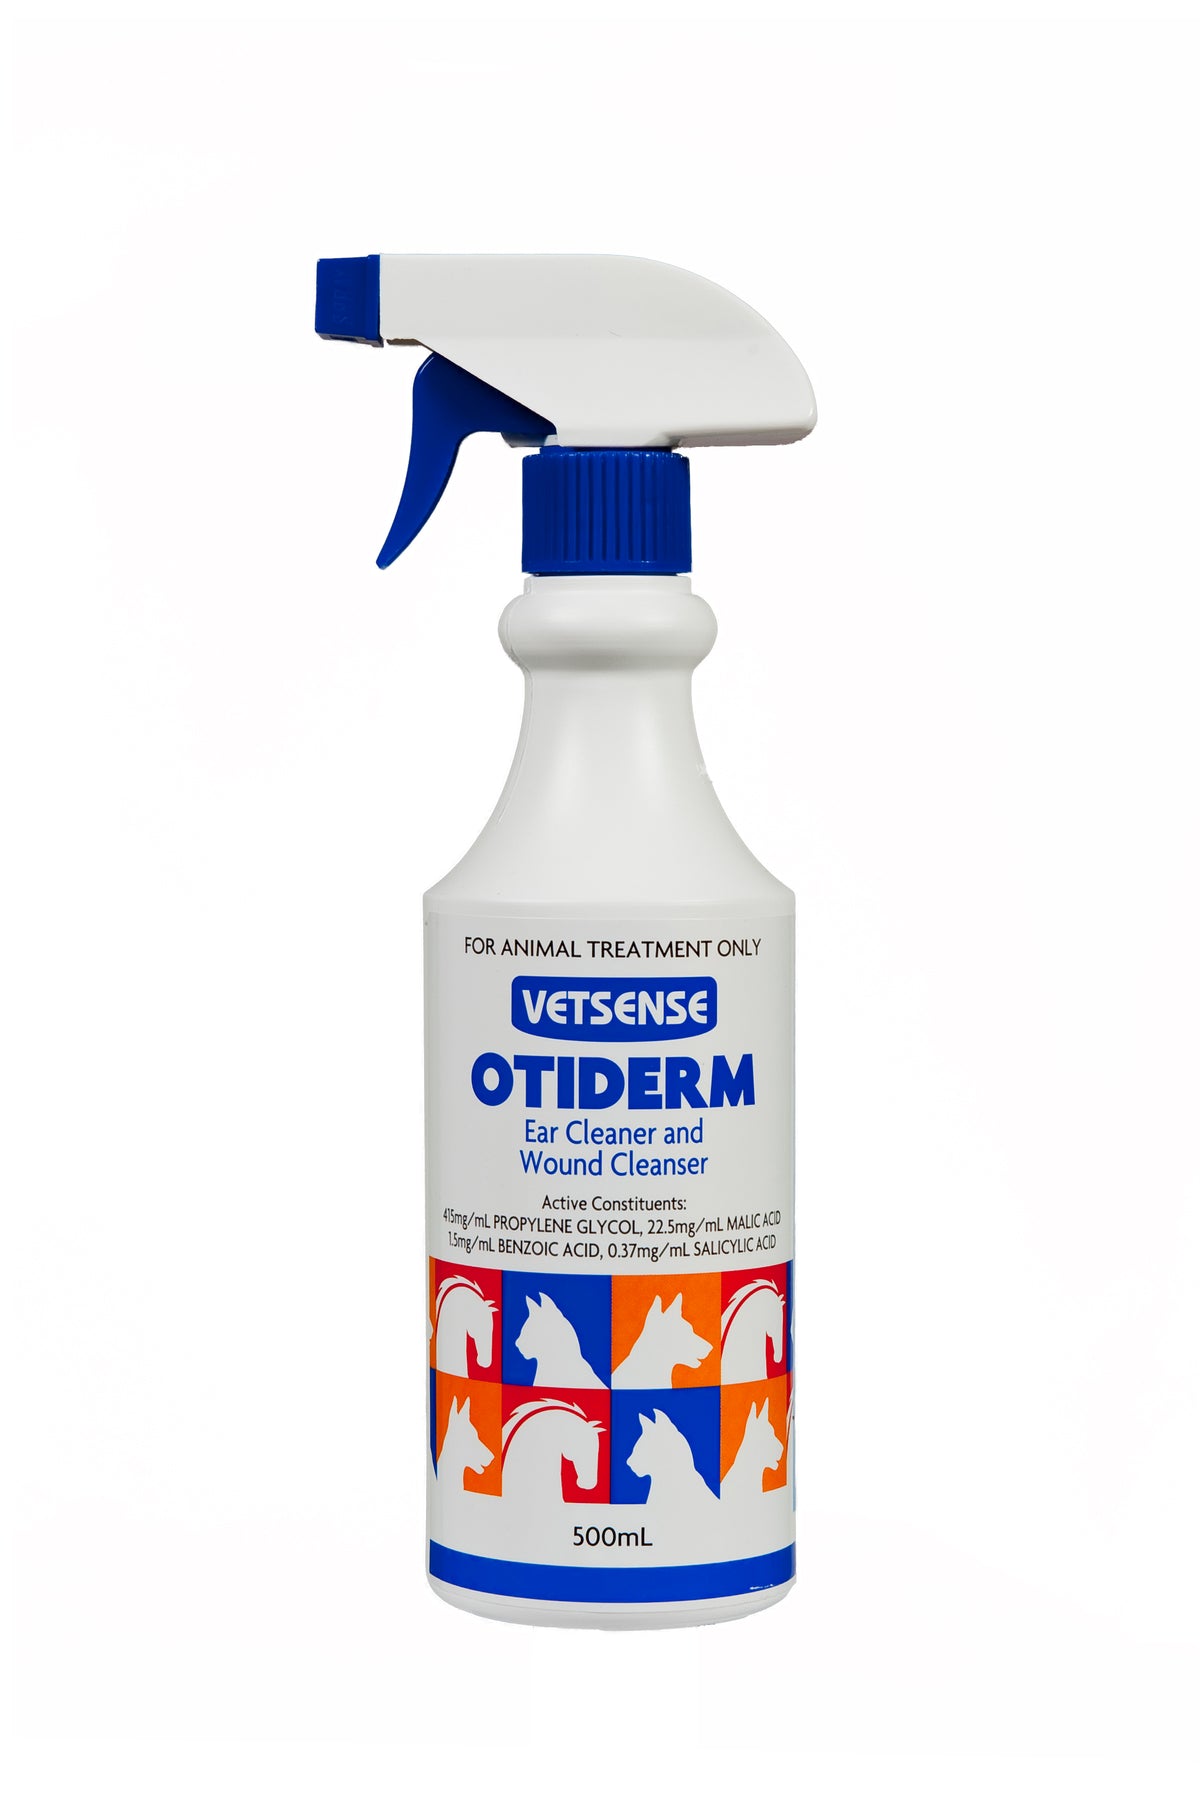 OTIDERM EAR CLEANER AND WOUND CLEANSER